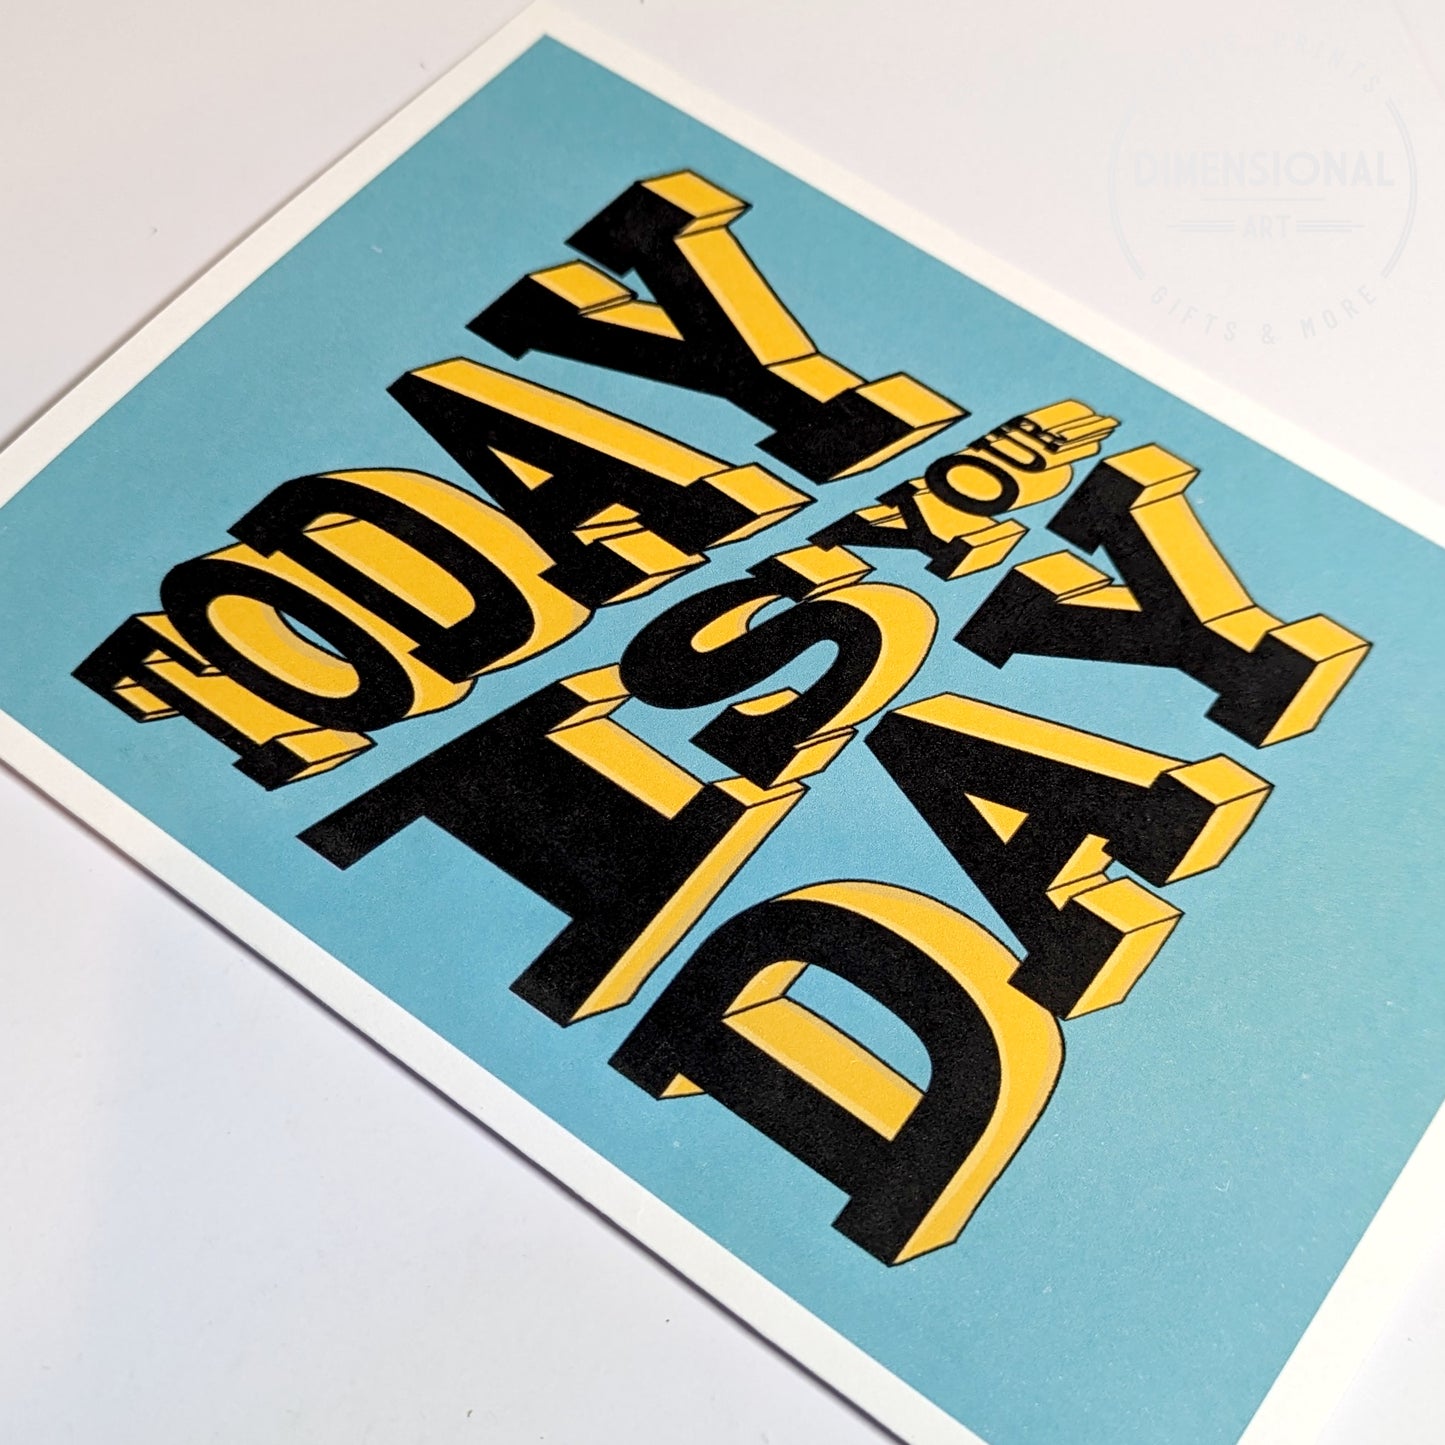 Today is your Day Card